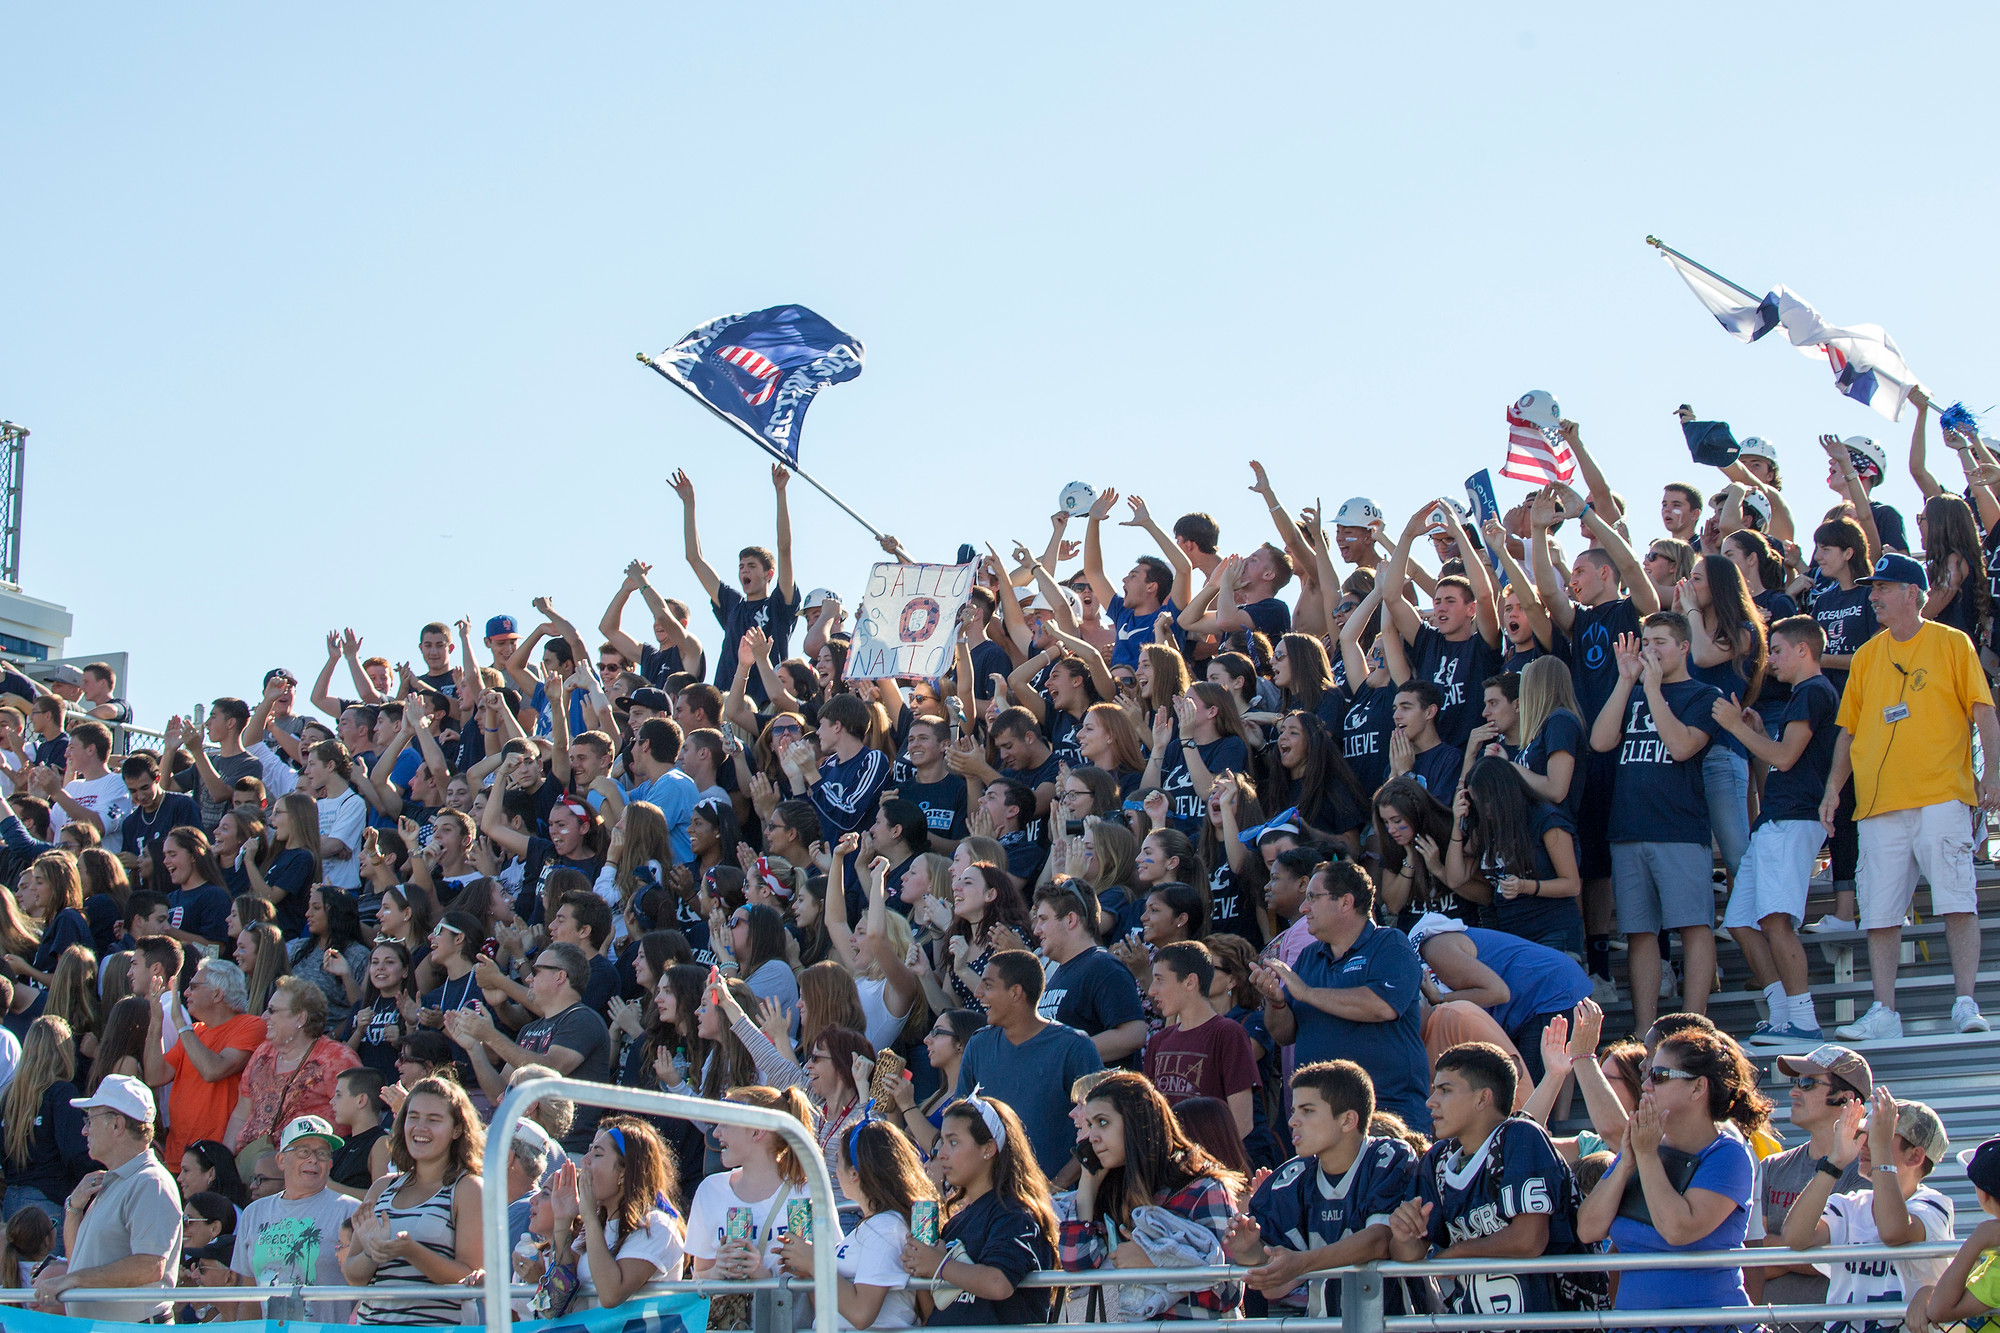 Sailors supporters filled the stands during Oceanside’s Homecoming game against East Meadow on Sept. 27.